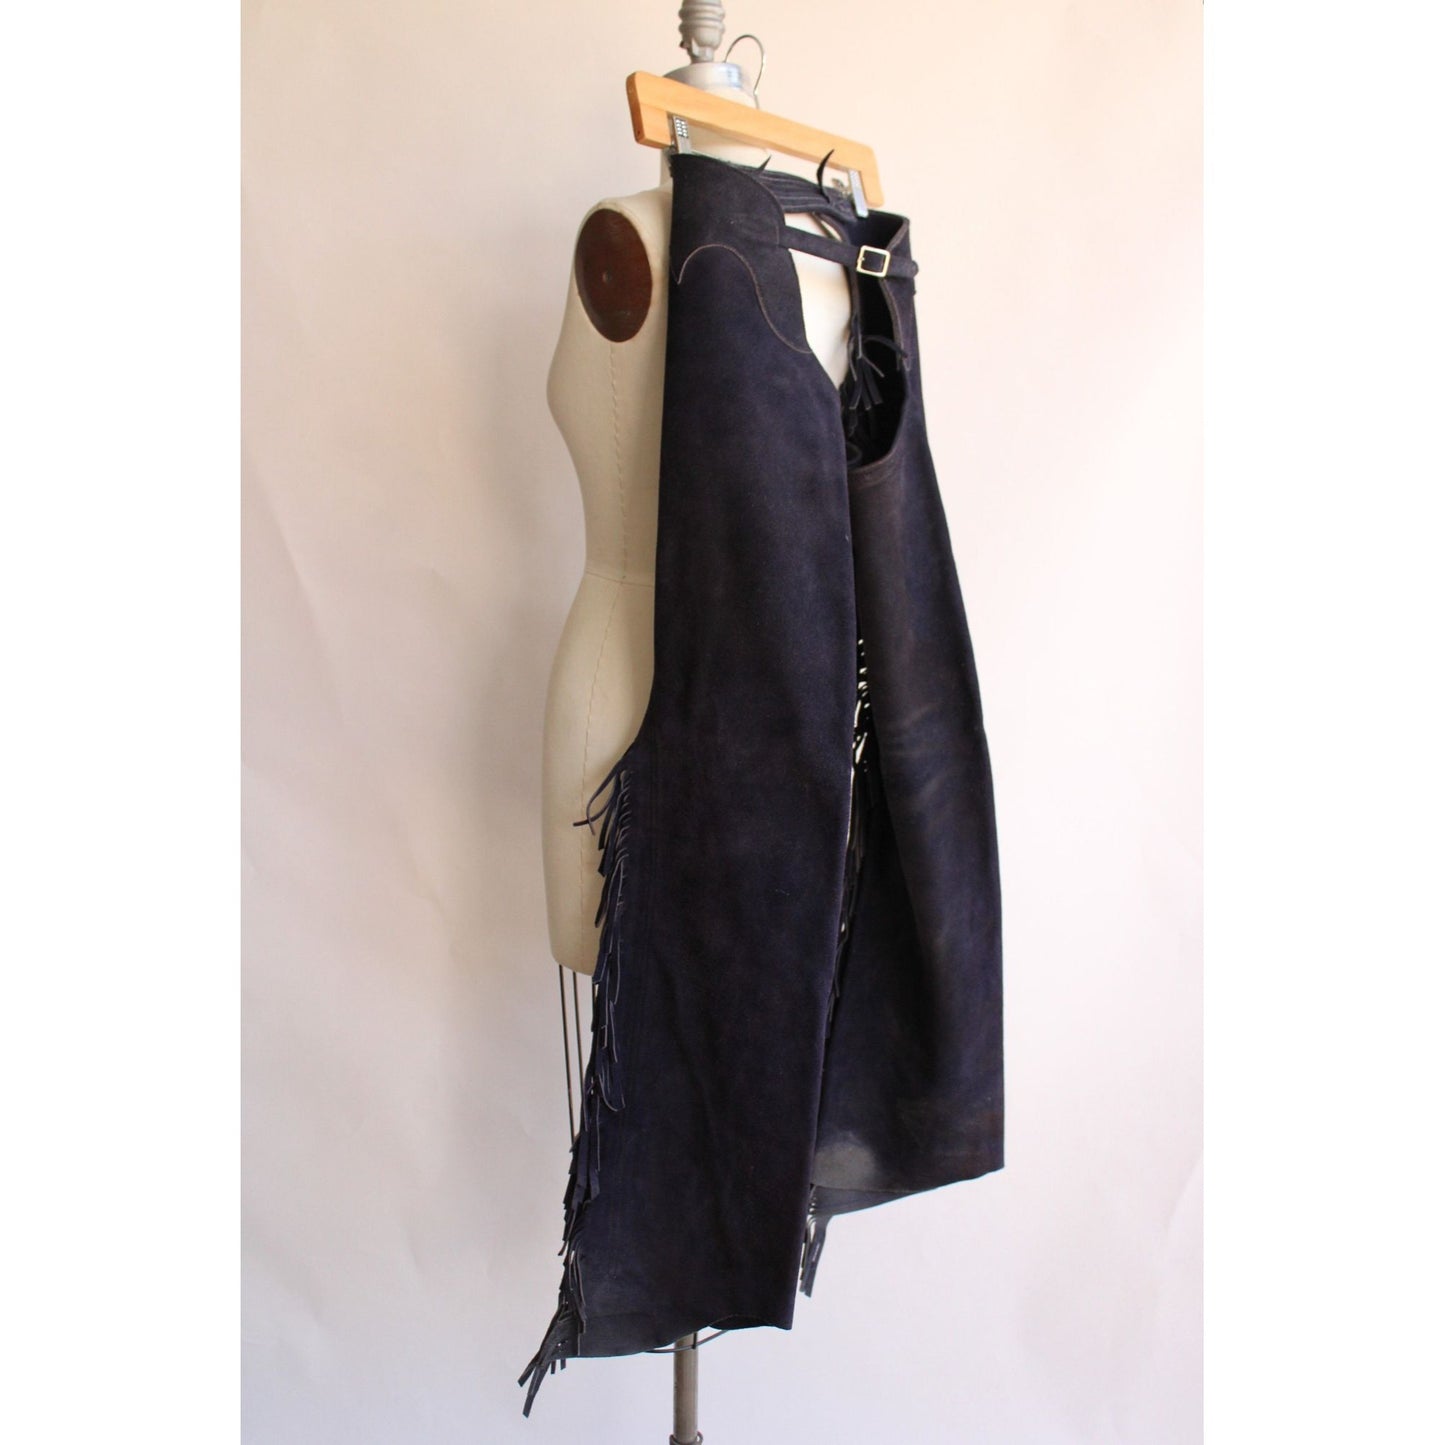 Vintage 1980s 1990s Navy Blue Suede Chaps with Fringe